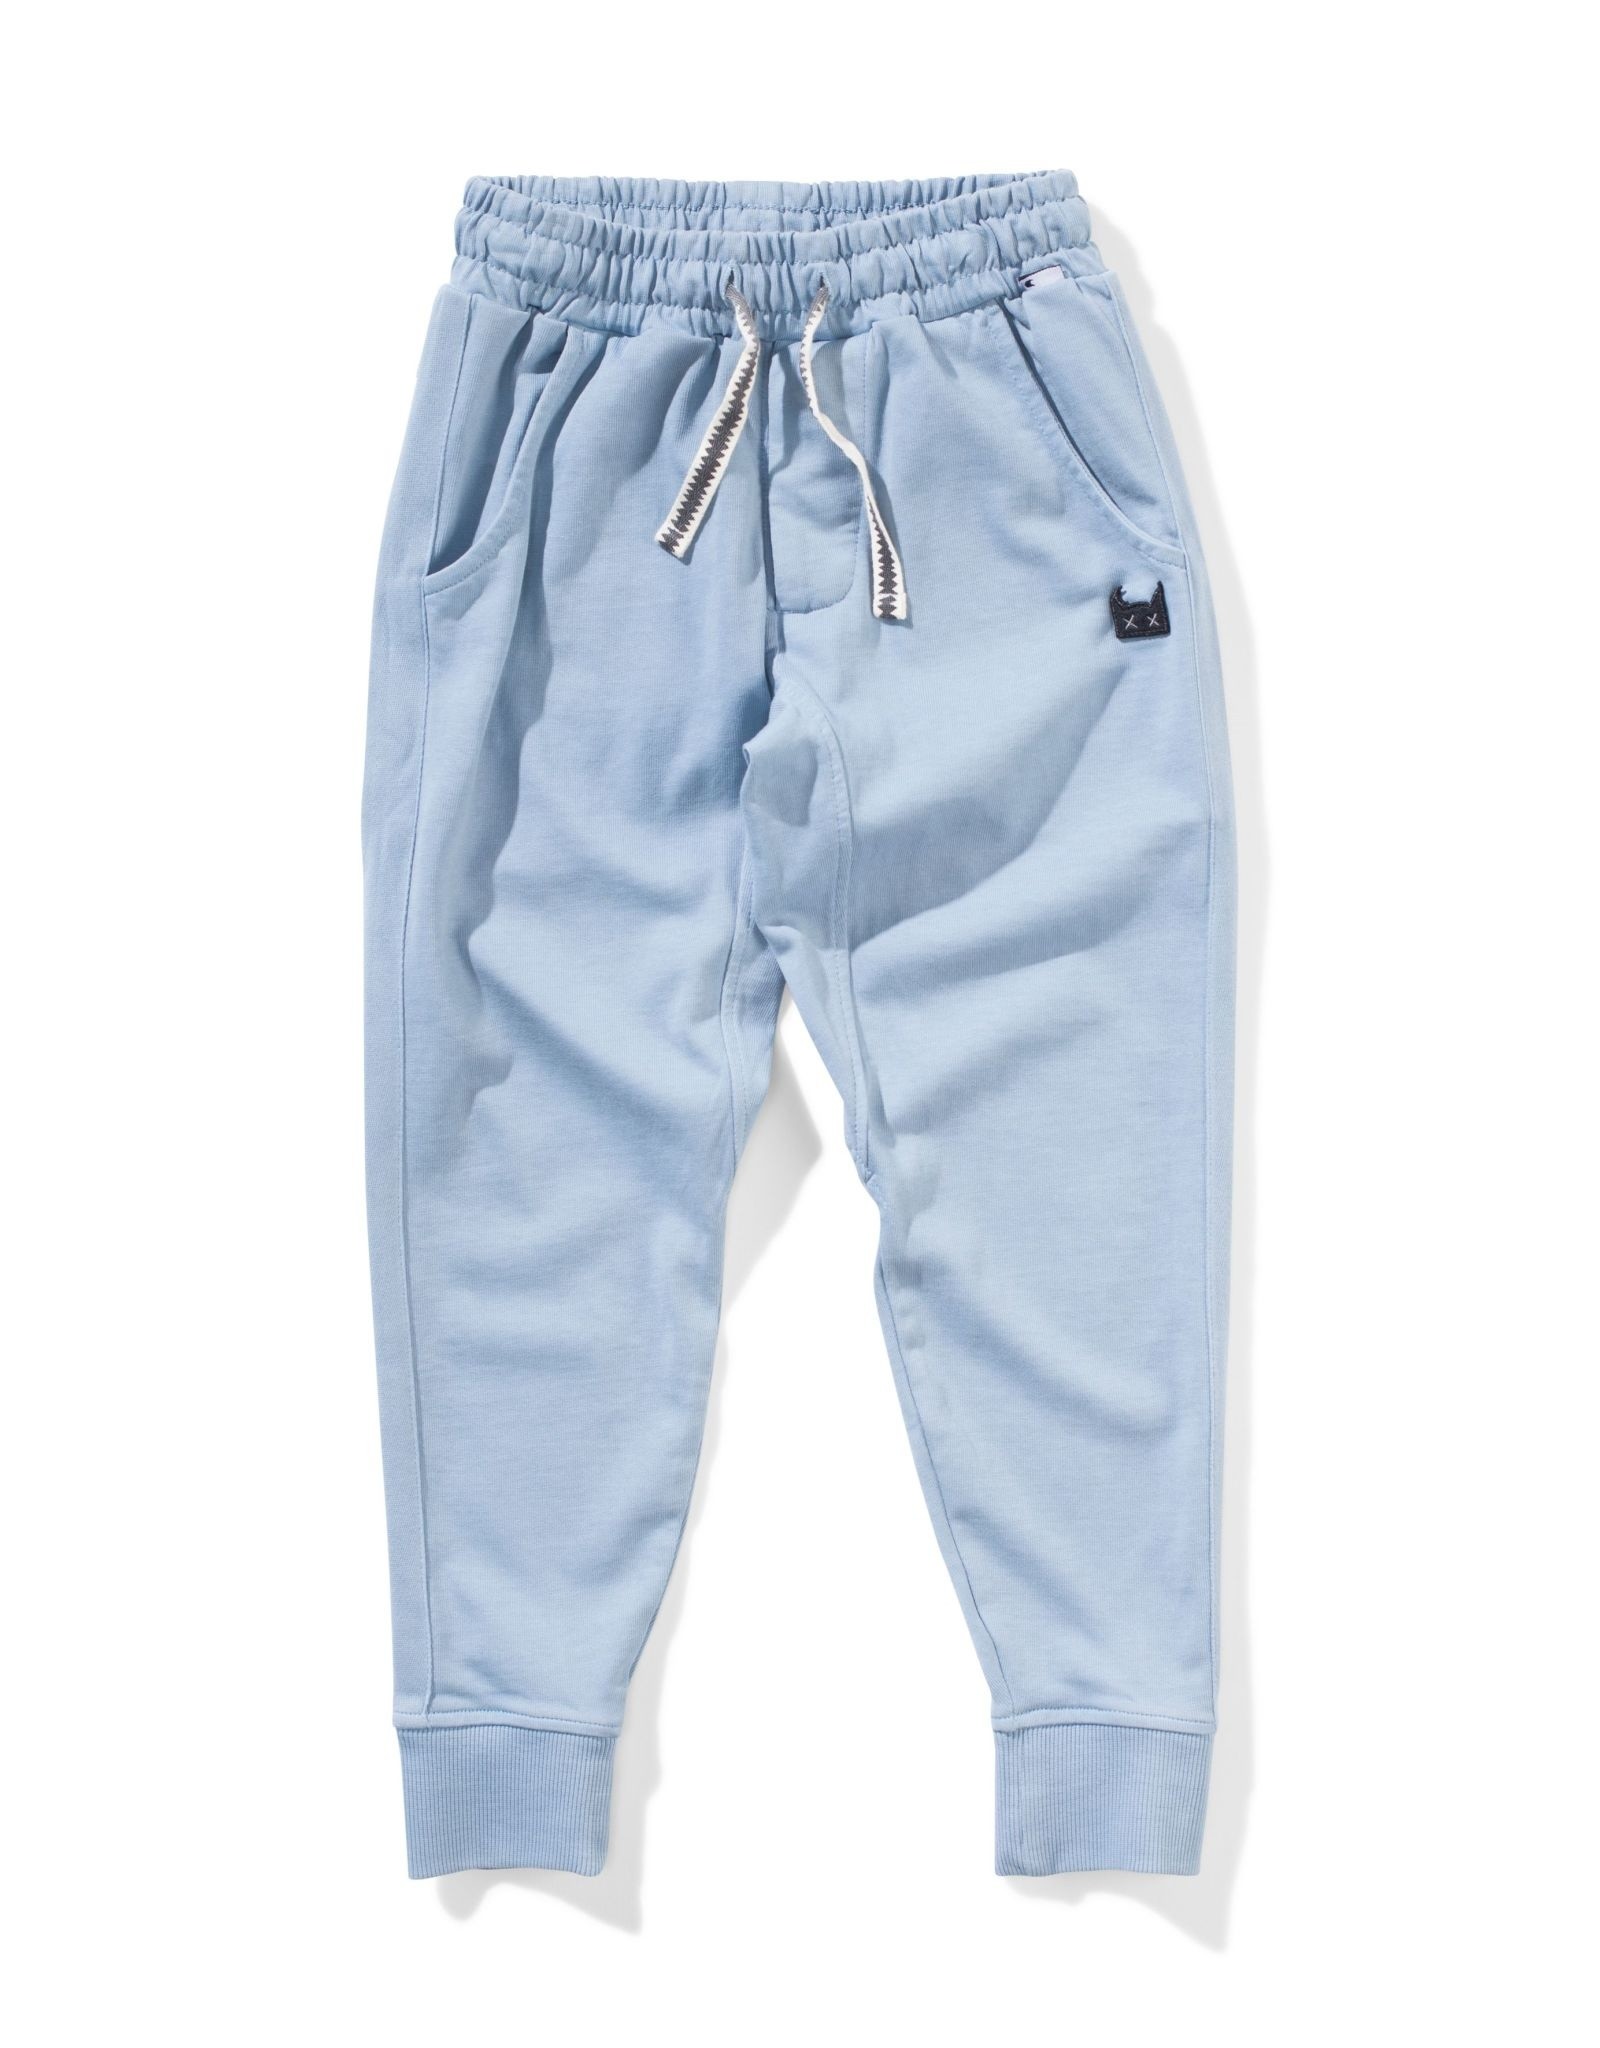 Munster Kids pipepos pant- mid blue